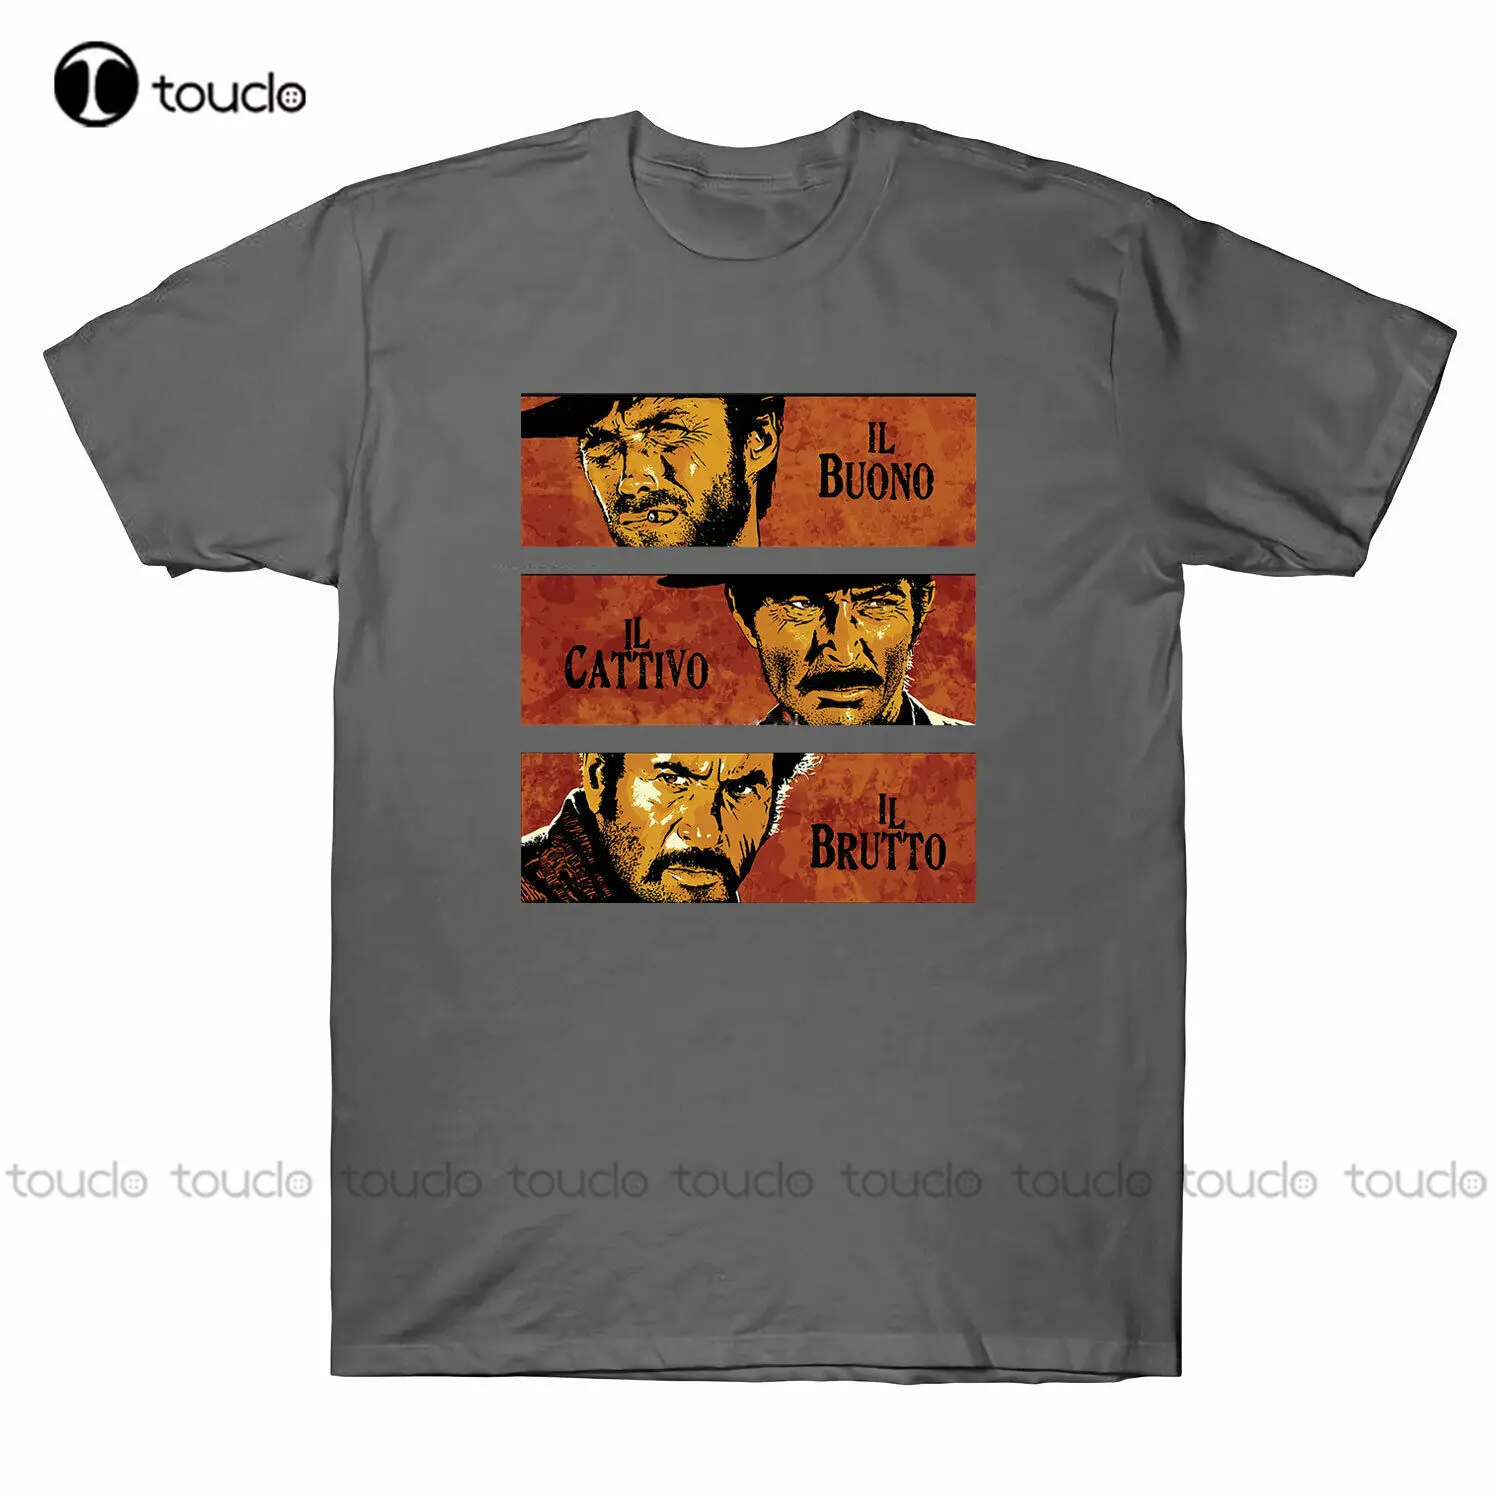 

The Good The Bad And The Ugly Clint Eastwood Movie Men'S T-Shirt Funny Gift New Mens Funny Tee Shirts Fashion Tshirt Summer